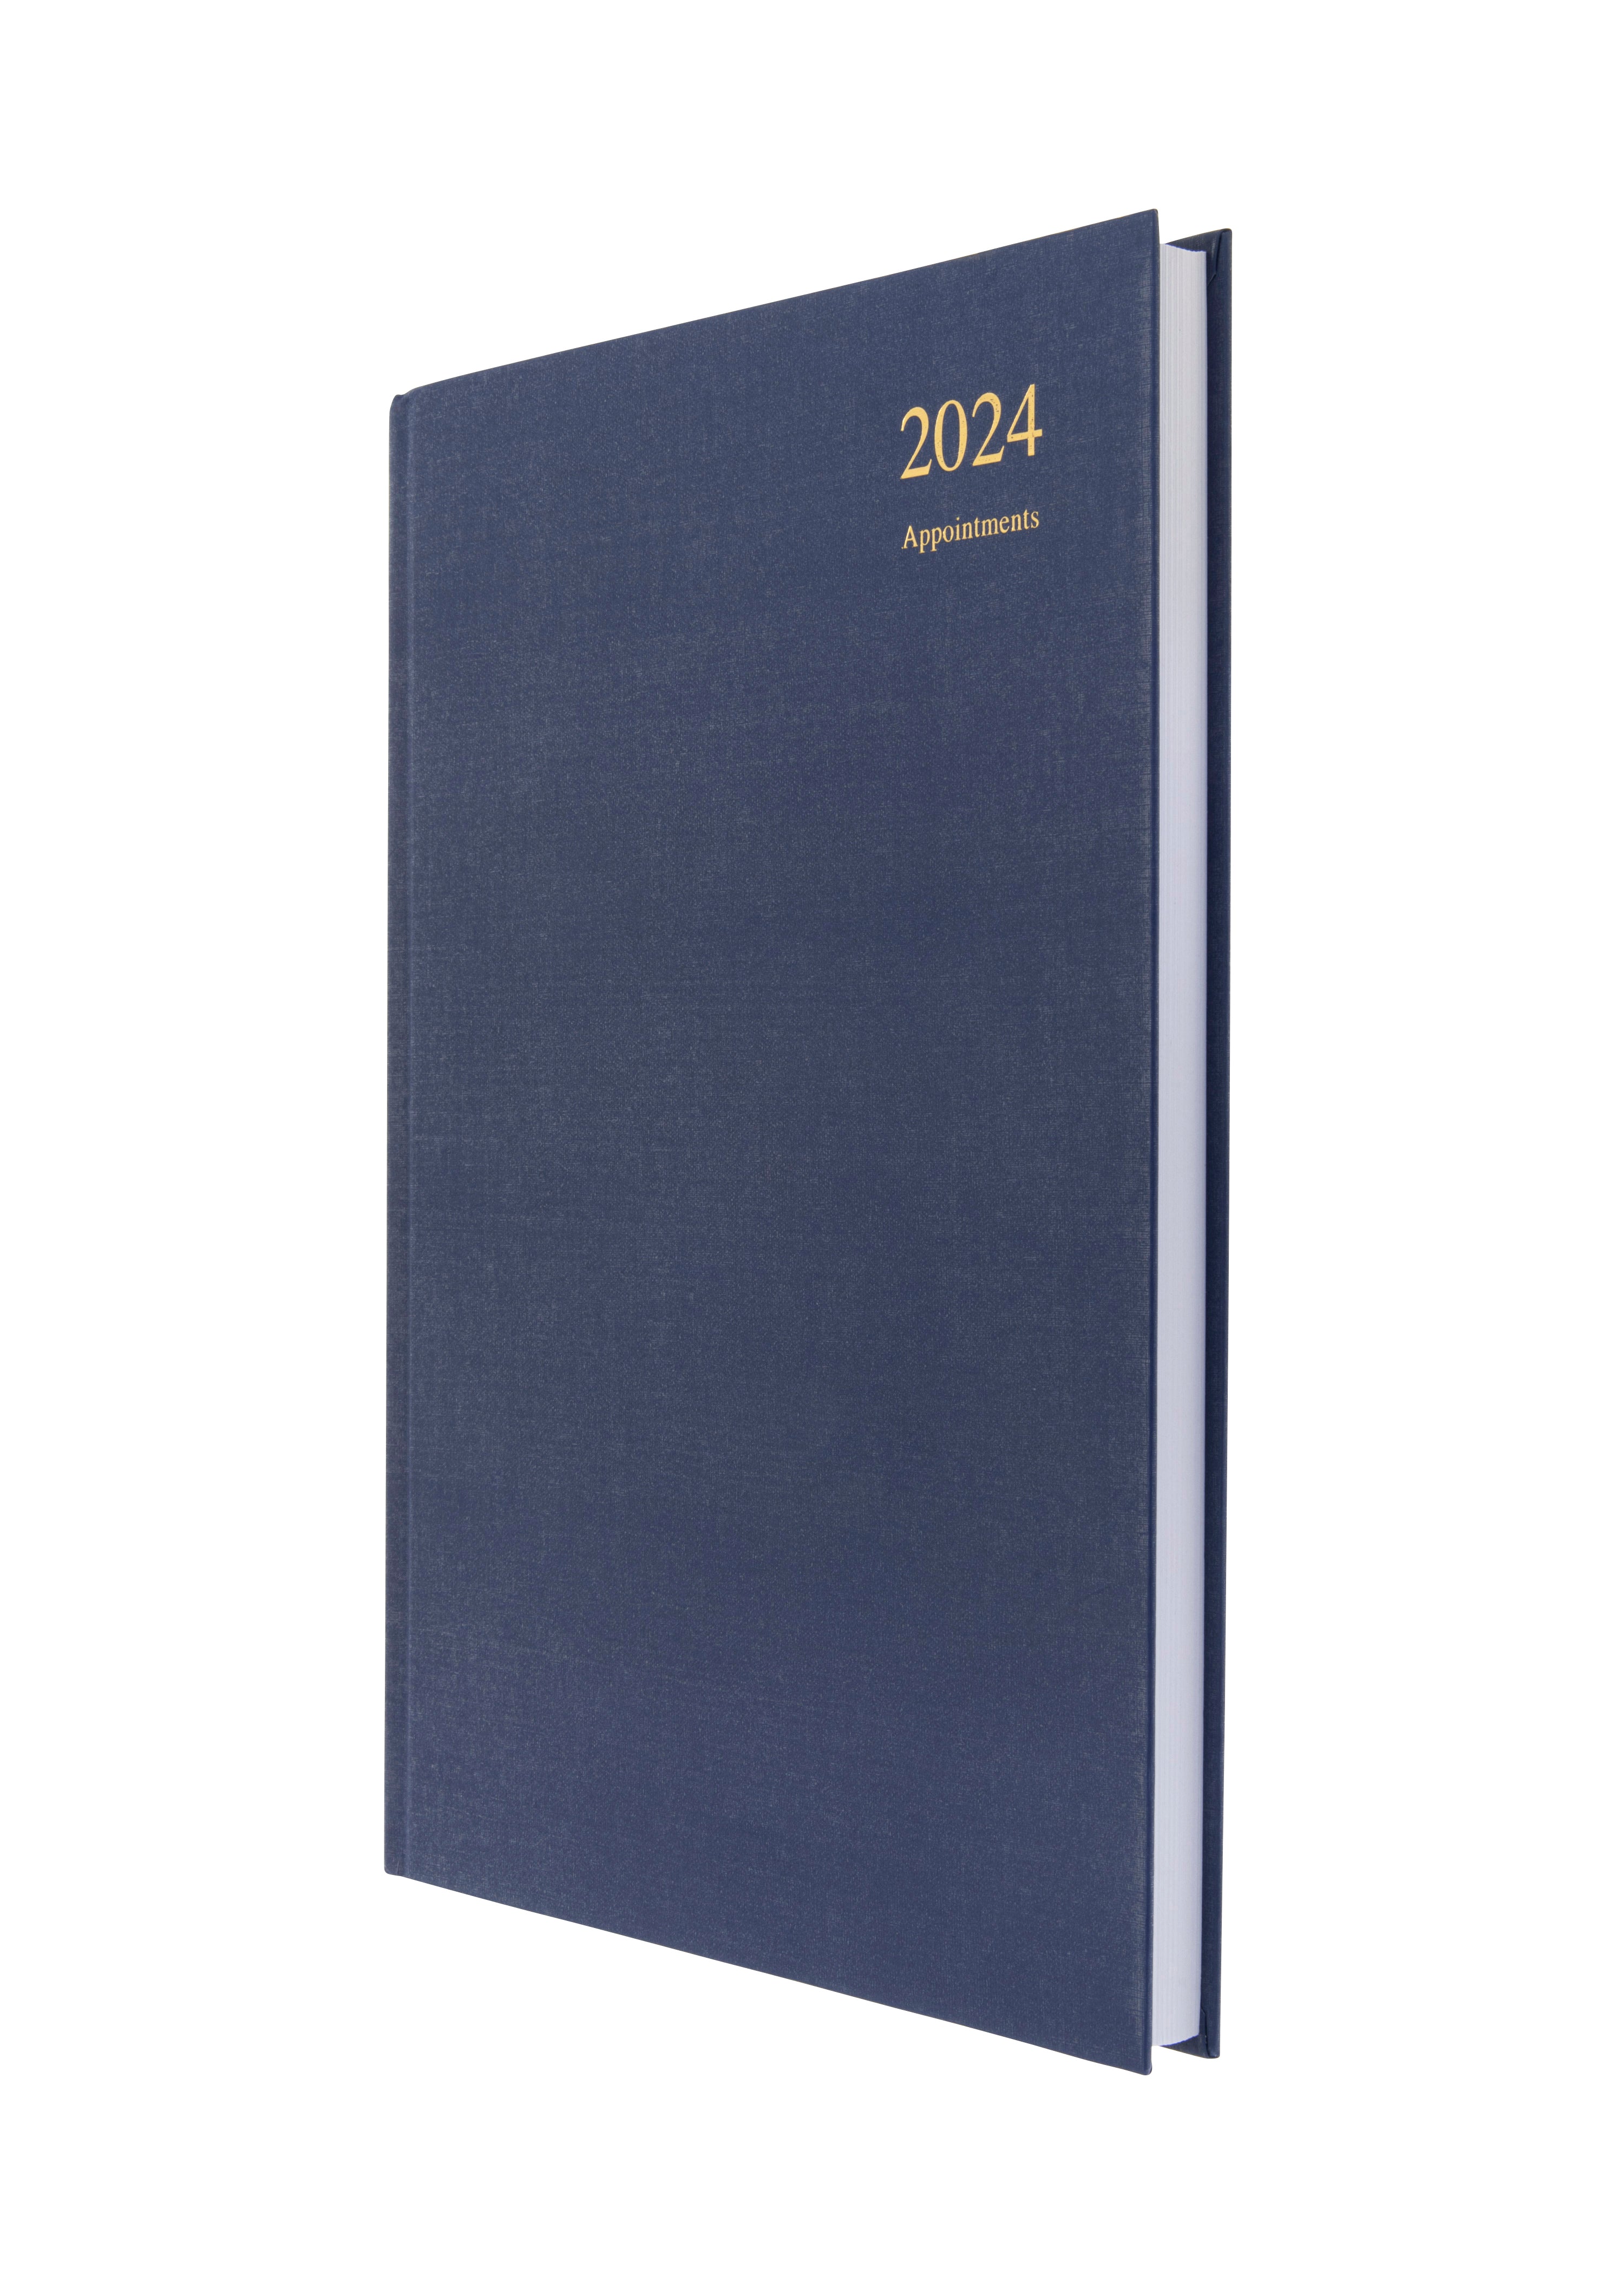 Collins Eco Friendly Essential - 2024 Daily Planner - A4 Day-to-Page Diary / Journal with Recycled Paper and Appointments (E-ESSA41A-24)